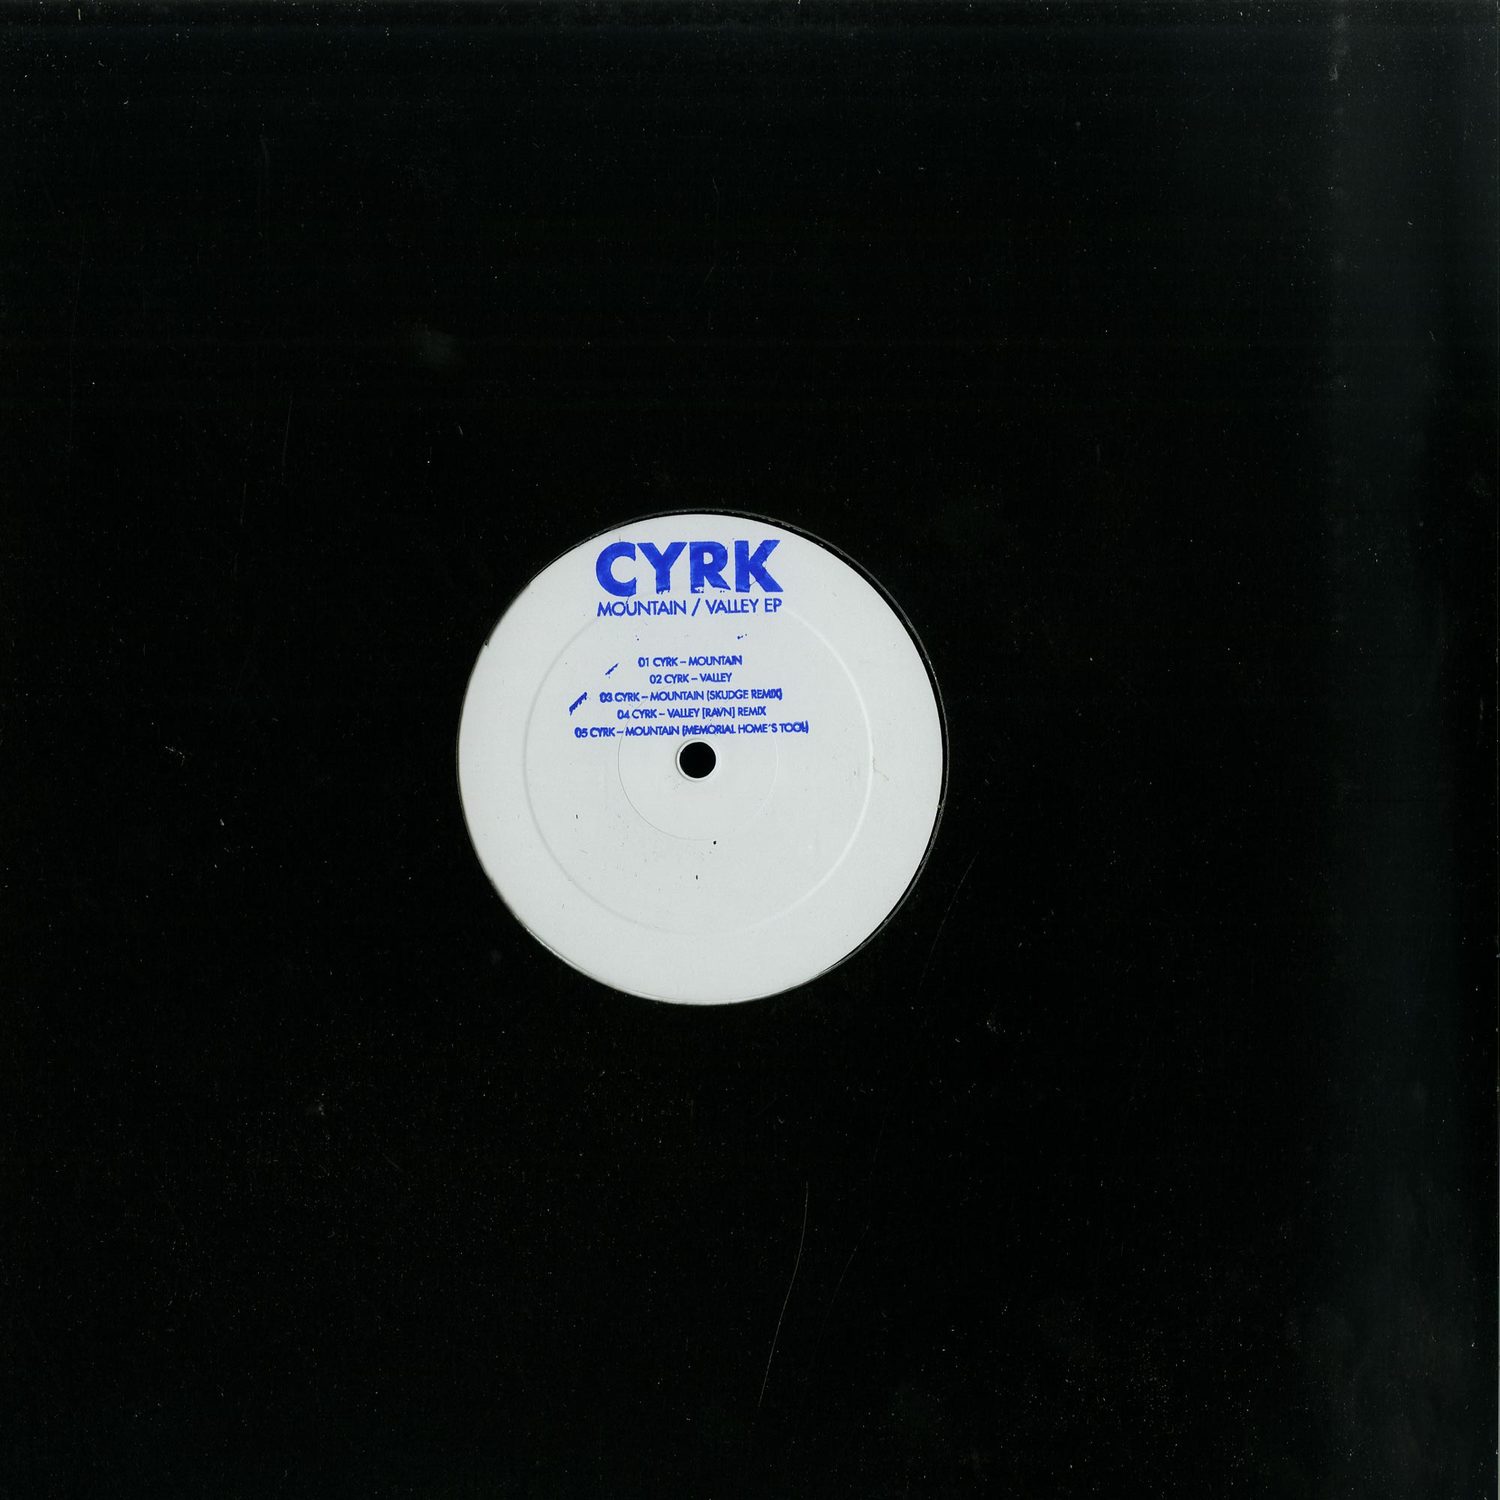 CYRK - MOUNTAIN / VALLEY EP 